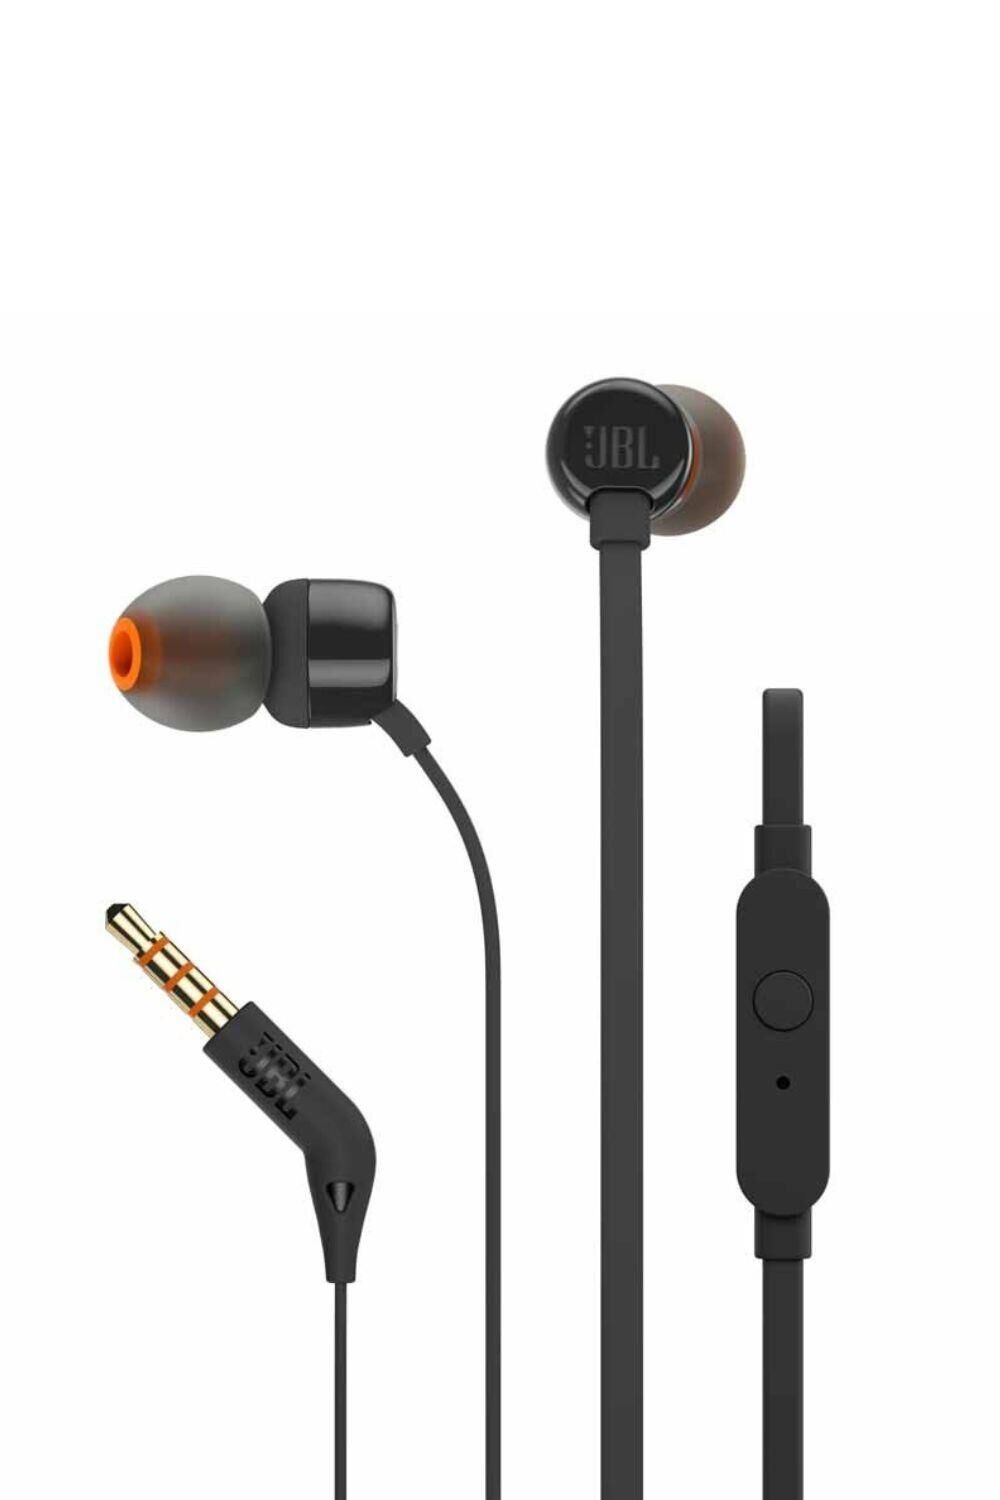 JBL JBL T110 Universal In-Ear Headphones with Remote Control and Microphone